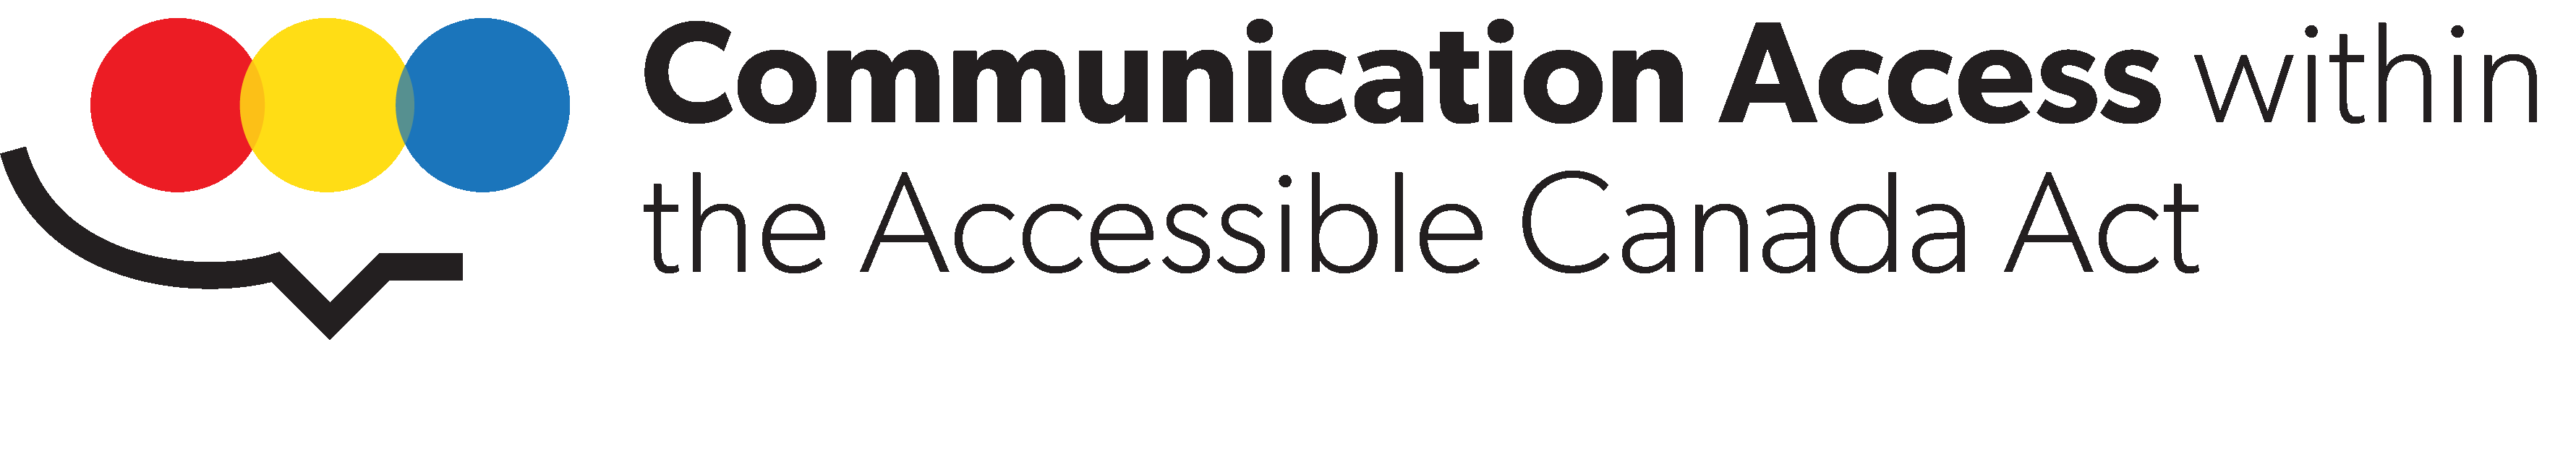 Communication Access within the Accessible Canada Act logo